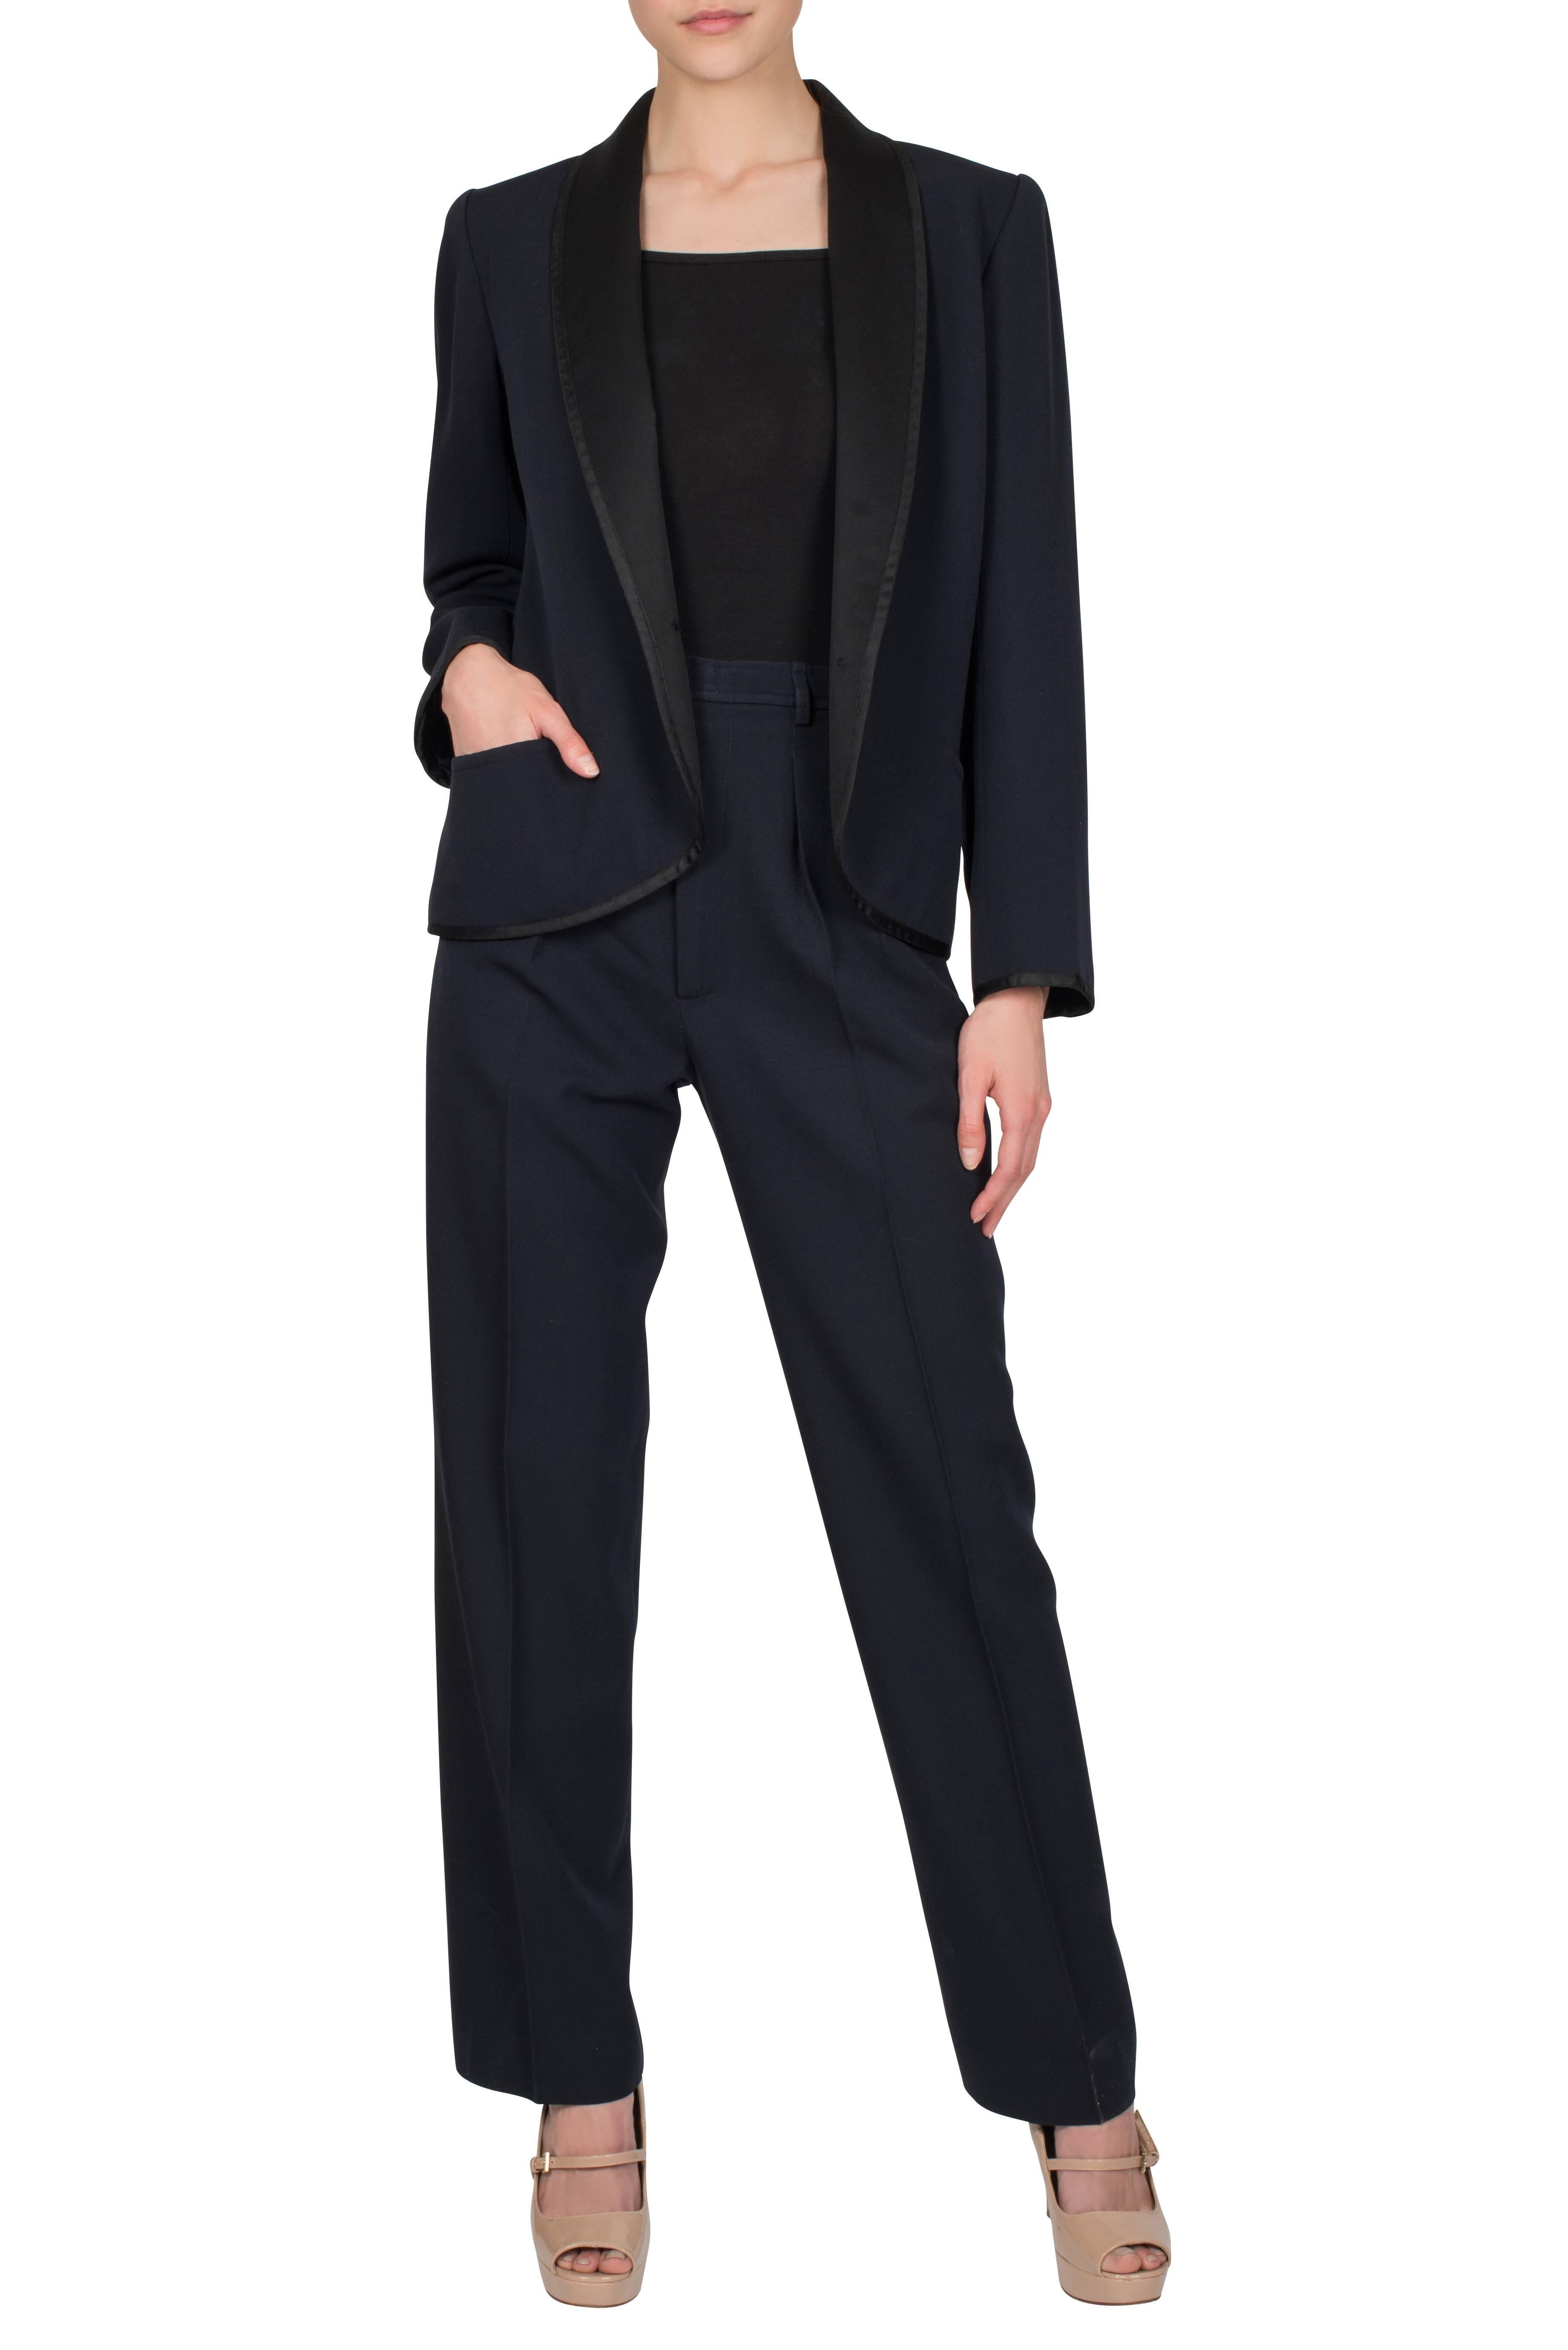 A late 1970's Yves Saint Laurent Rive Gauche navy blue wool ‘Le Smoking’ trouser suit with black silk lapels. The tailored navy blue wool jacket features two hip pockets, lightly padded shoulders and bracelet-length sleeves with buttons and a black